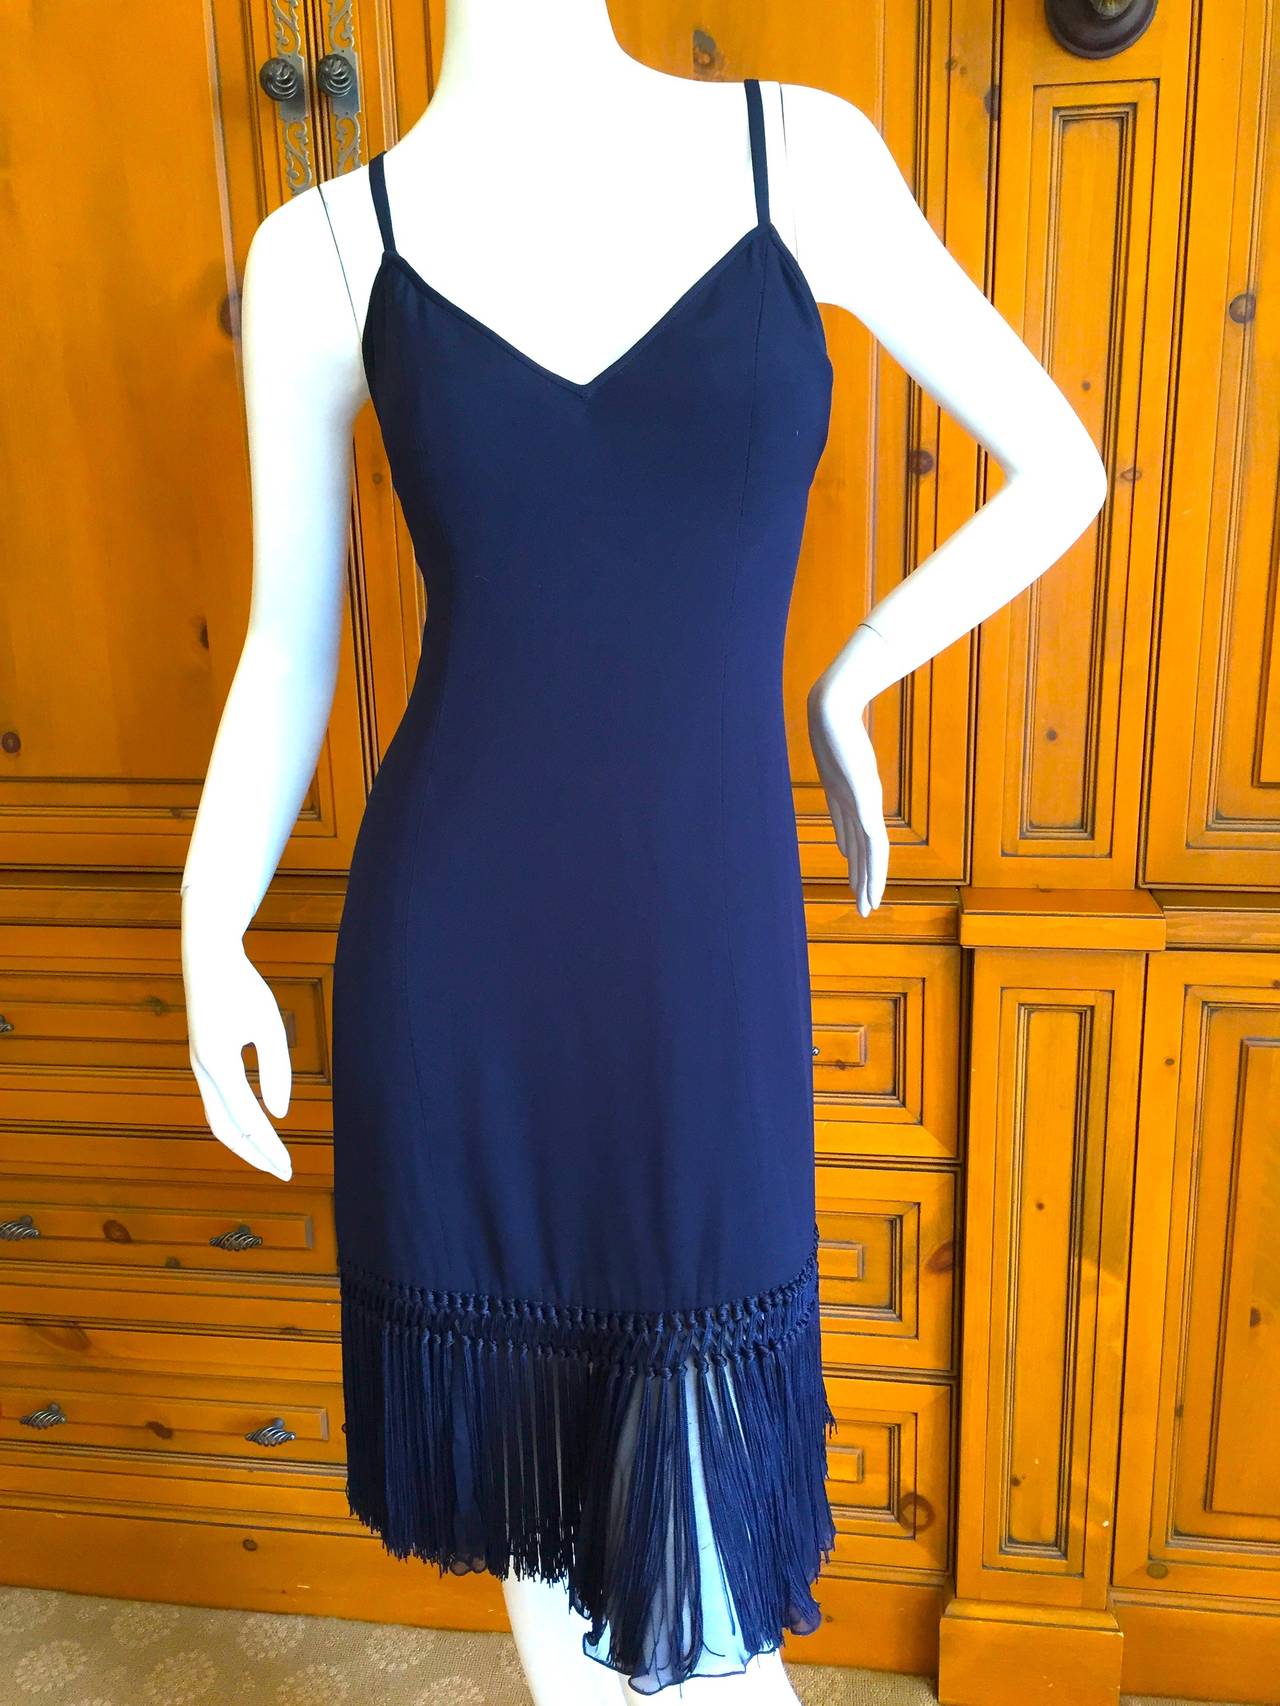 Valentino Boutique Vintage Navy Blue Fringed Dress w Matching Fringed Cashmere Sweater
This is such a wonderful set, in motion it is exquisite
Size 6
Dress
Bust 36